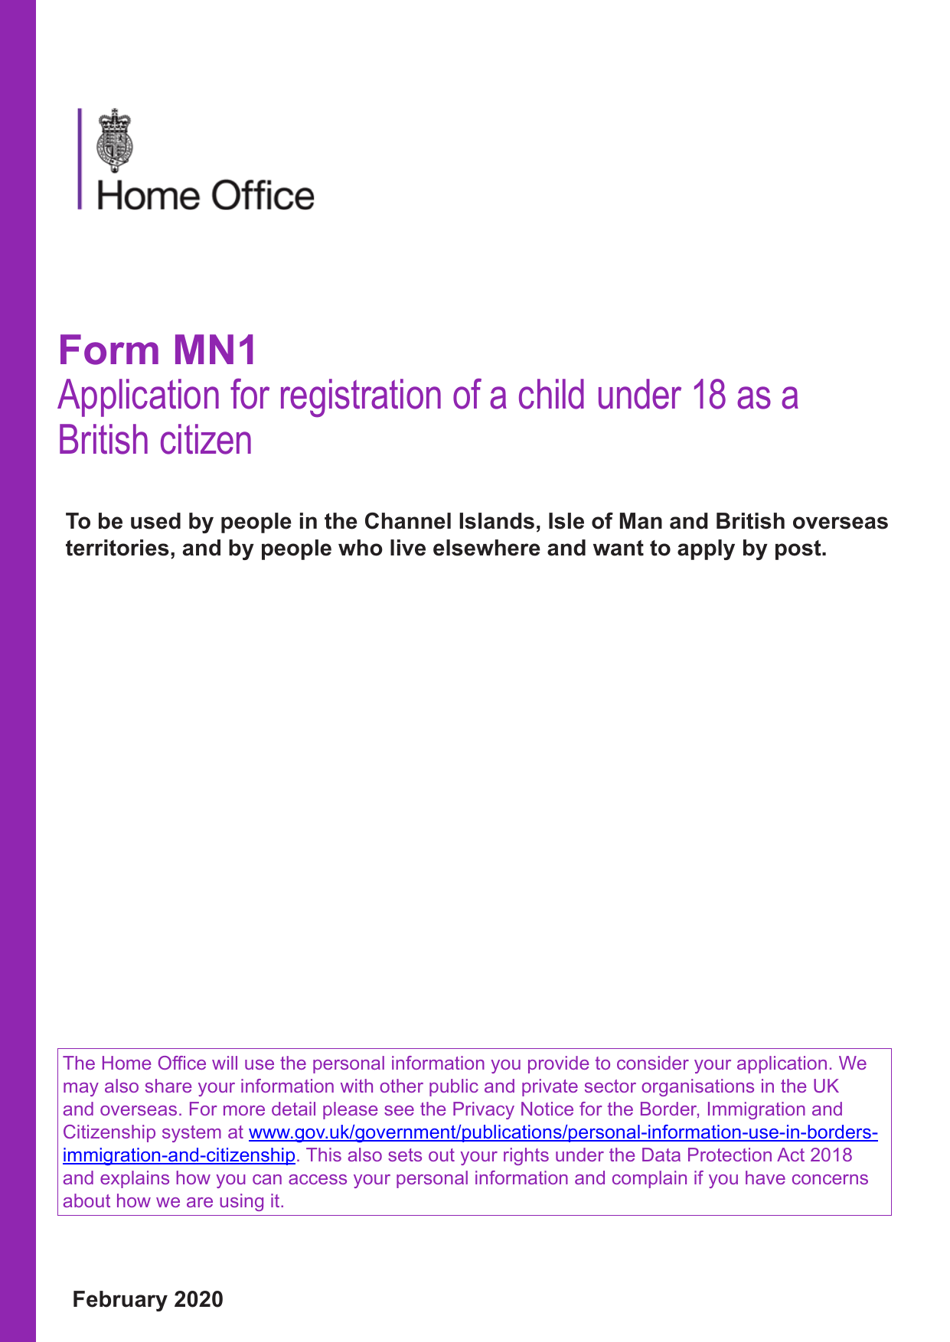 Form MN1 Application for Registration of a Child Under 18 as a British Citizen - United Kingdom, Page 1